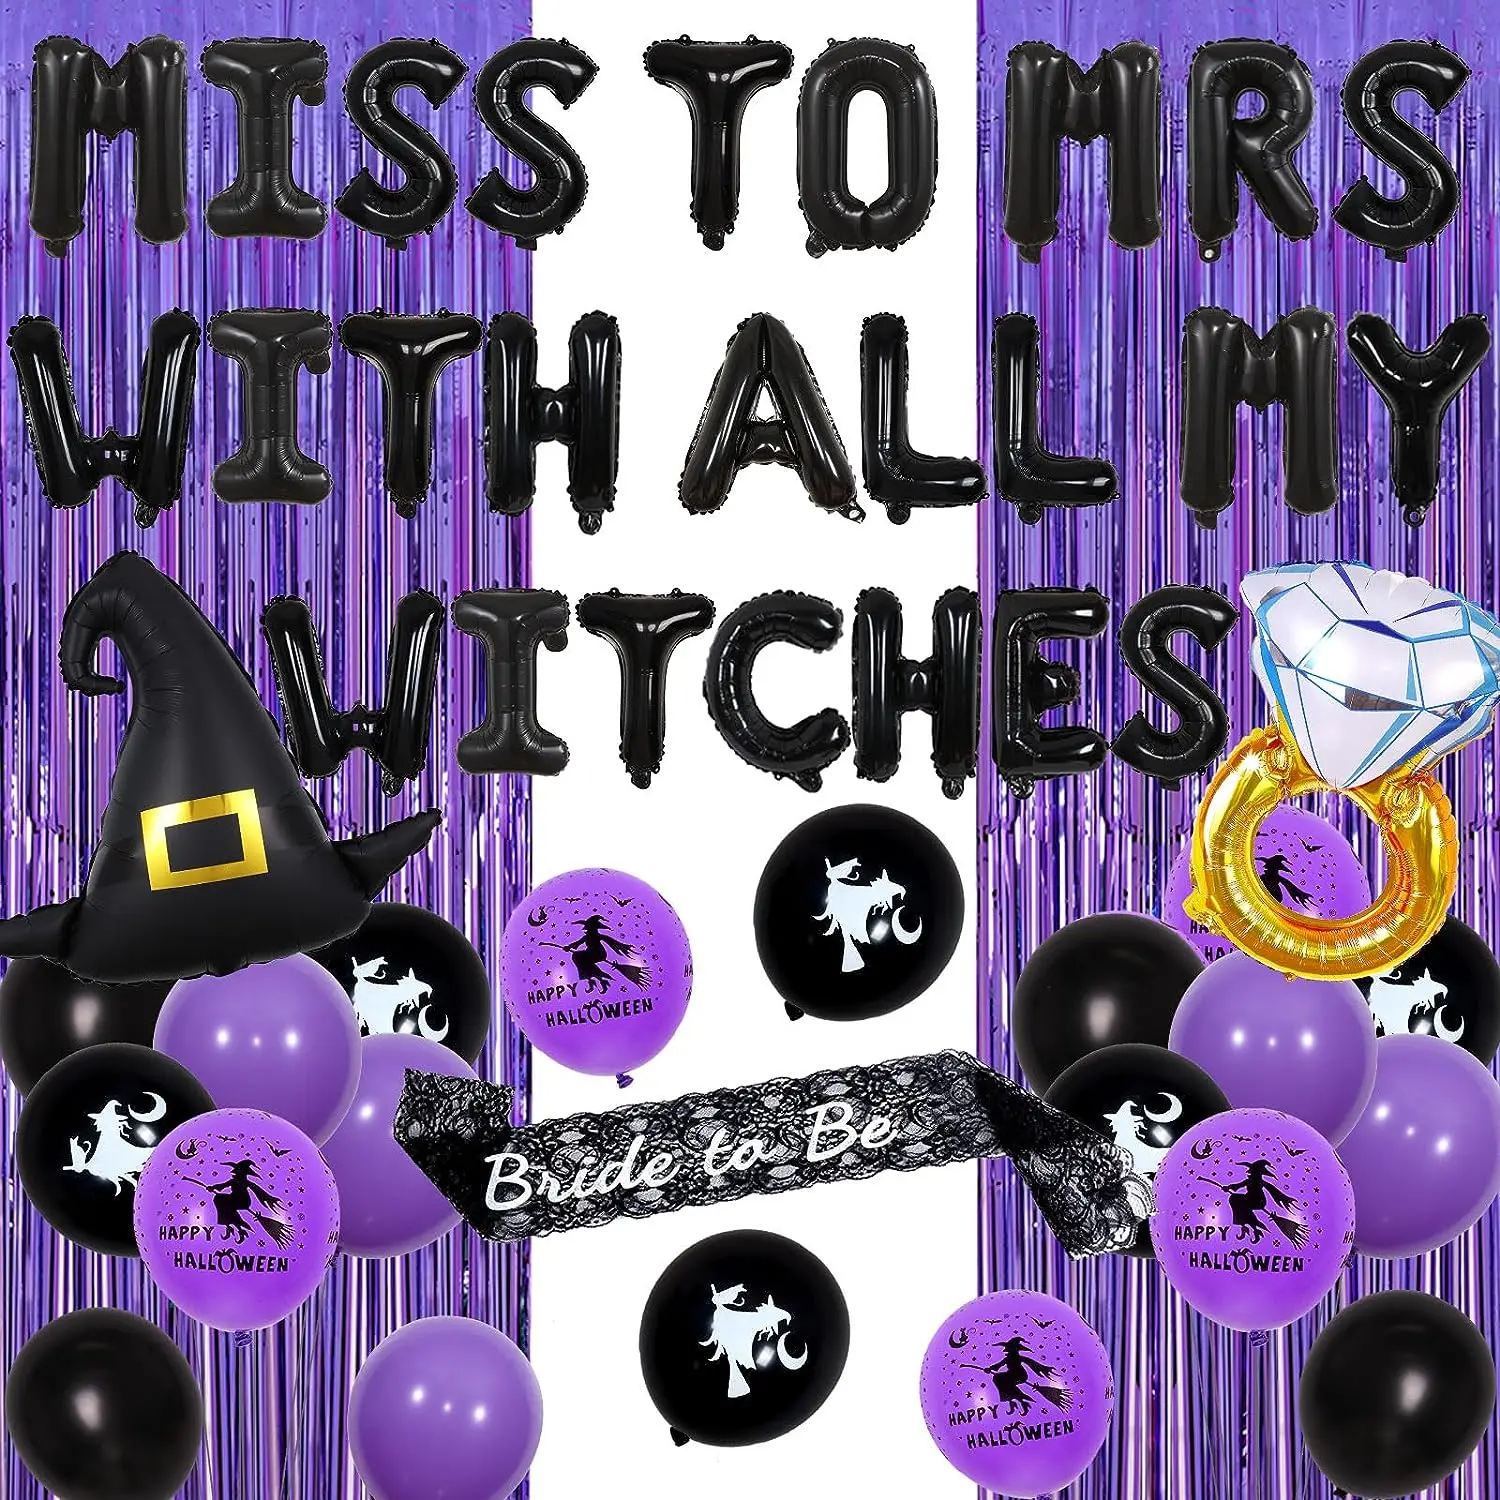 

Halloween Bachelorette Party Decorations Miss To Mrs with All My Witches Balloons Banner Bride To Be Sash Bridal Shower Decor